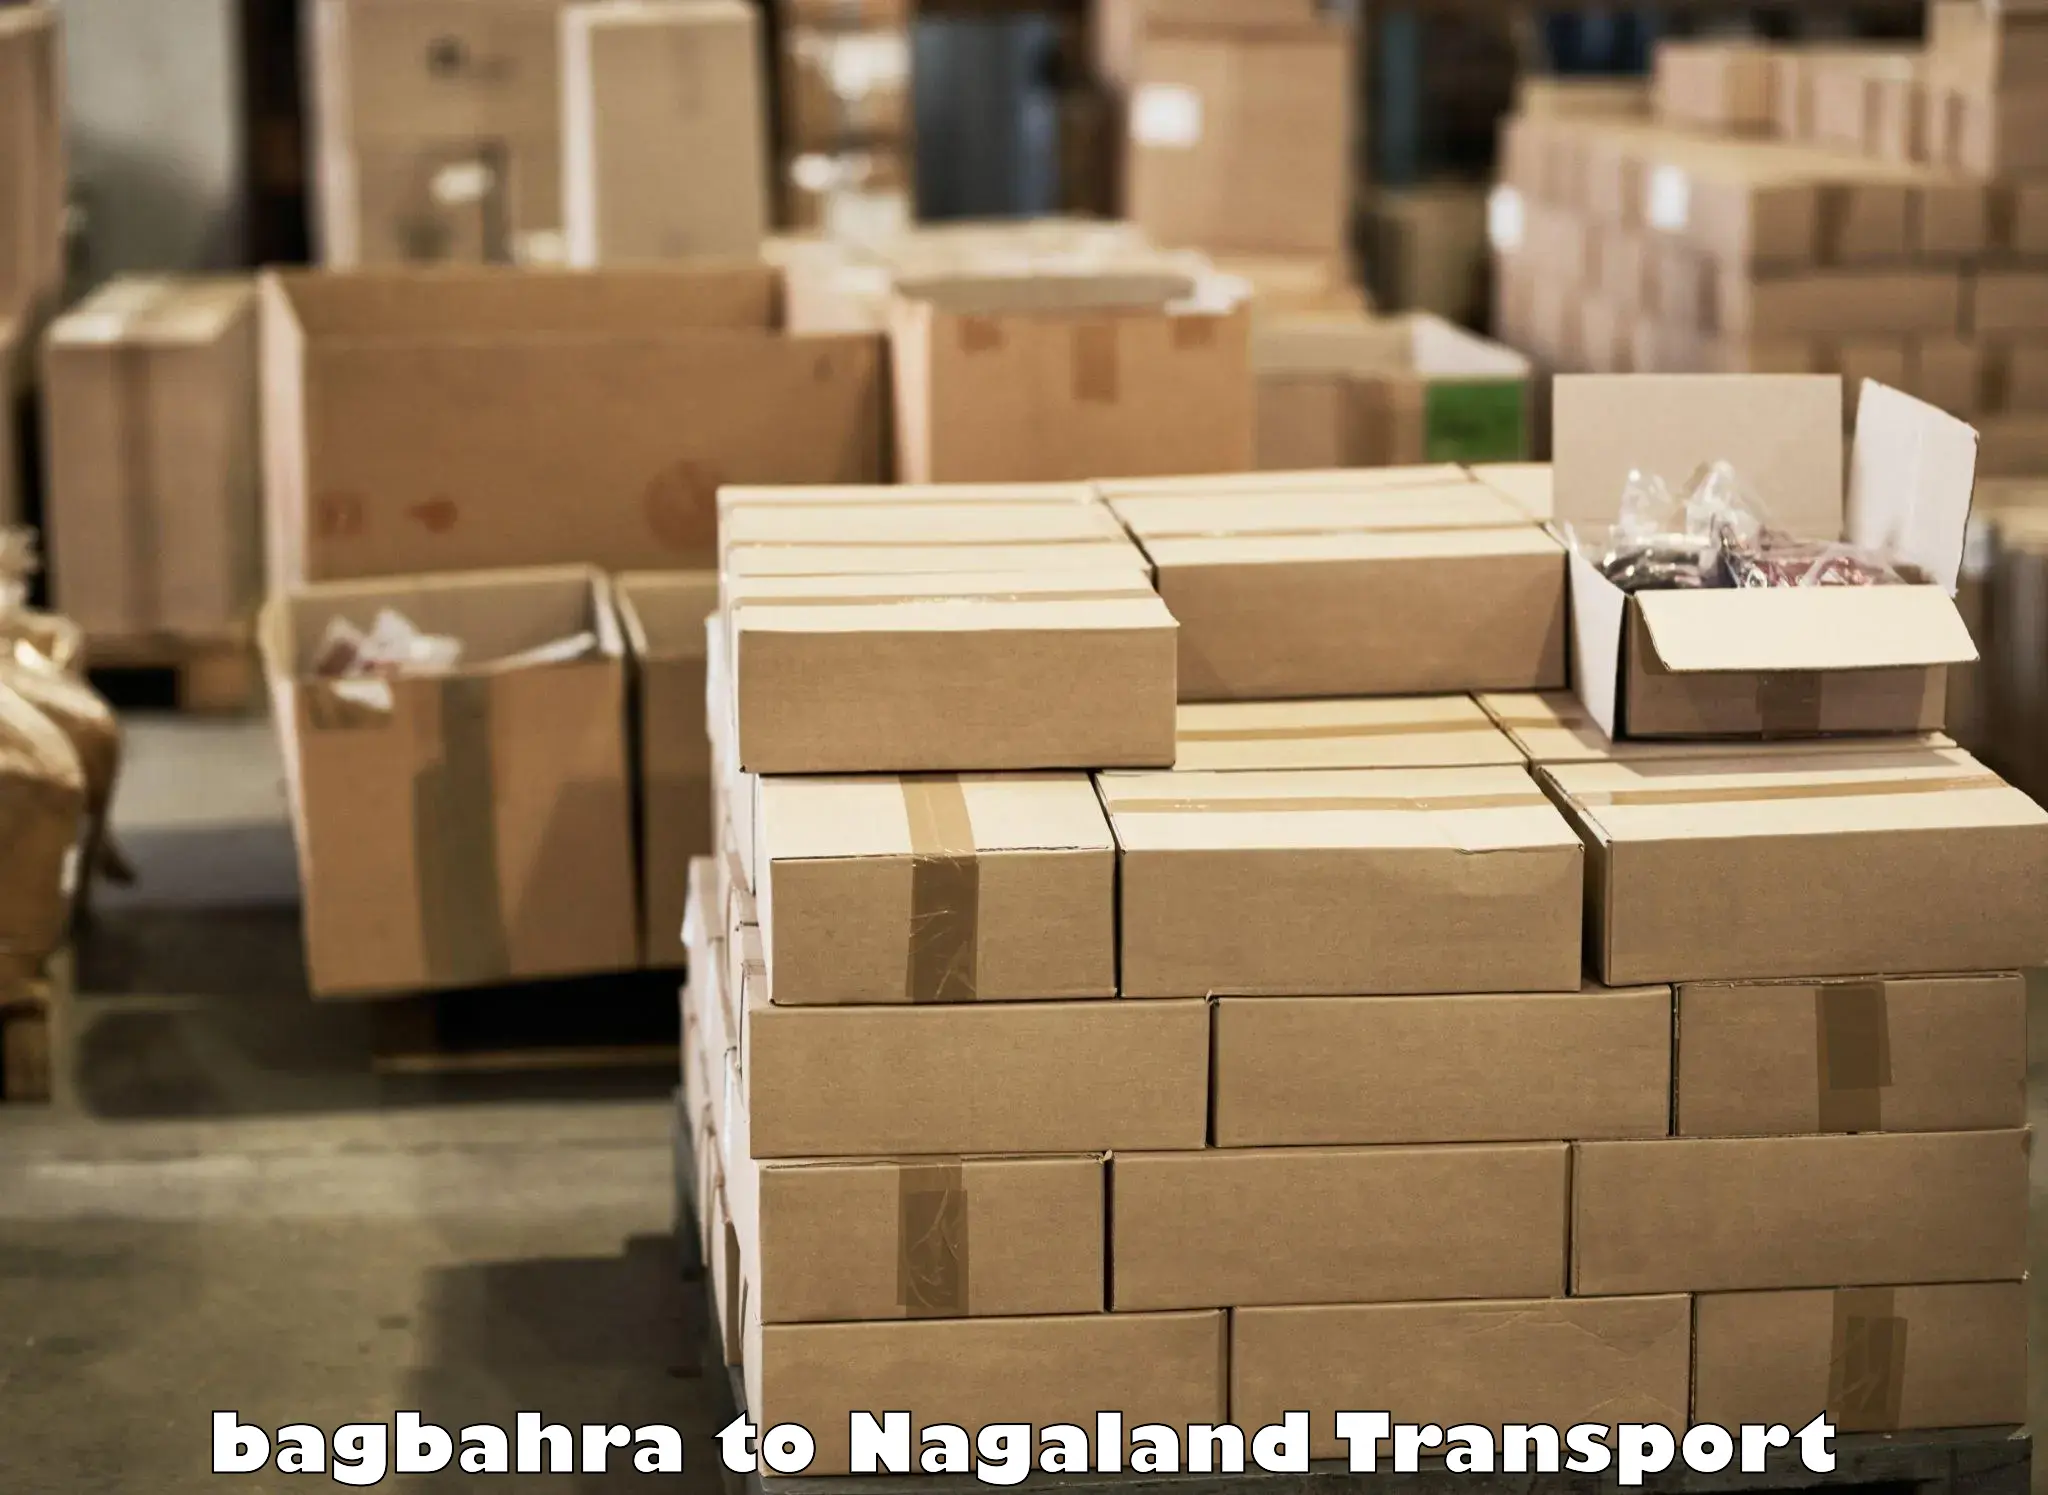 Two wheeler parcel service bagbahra to Nagaland